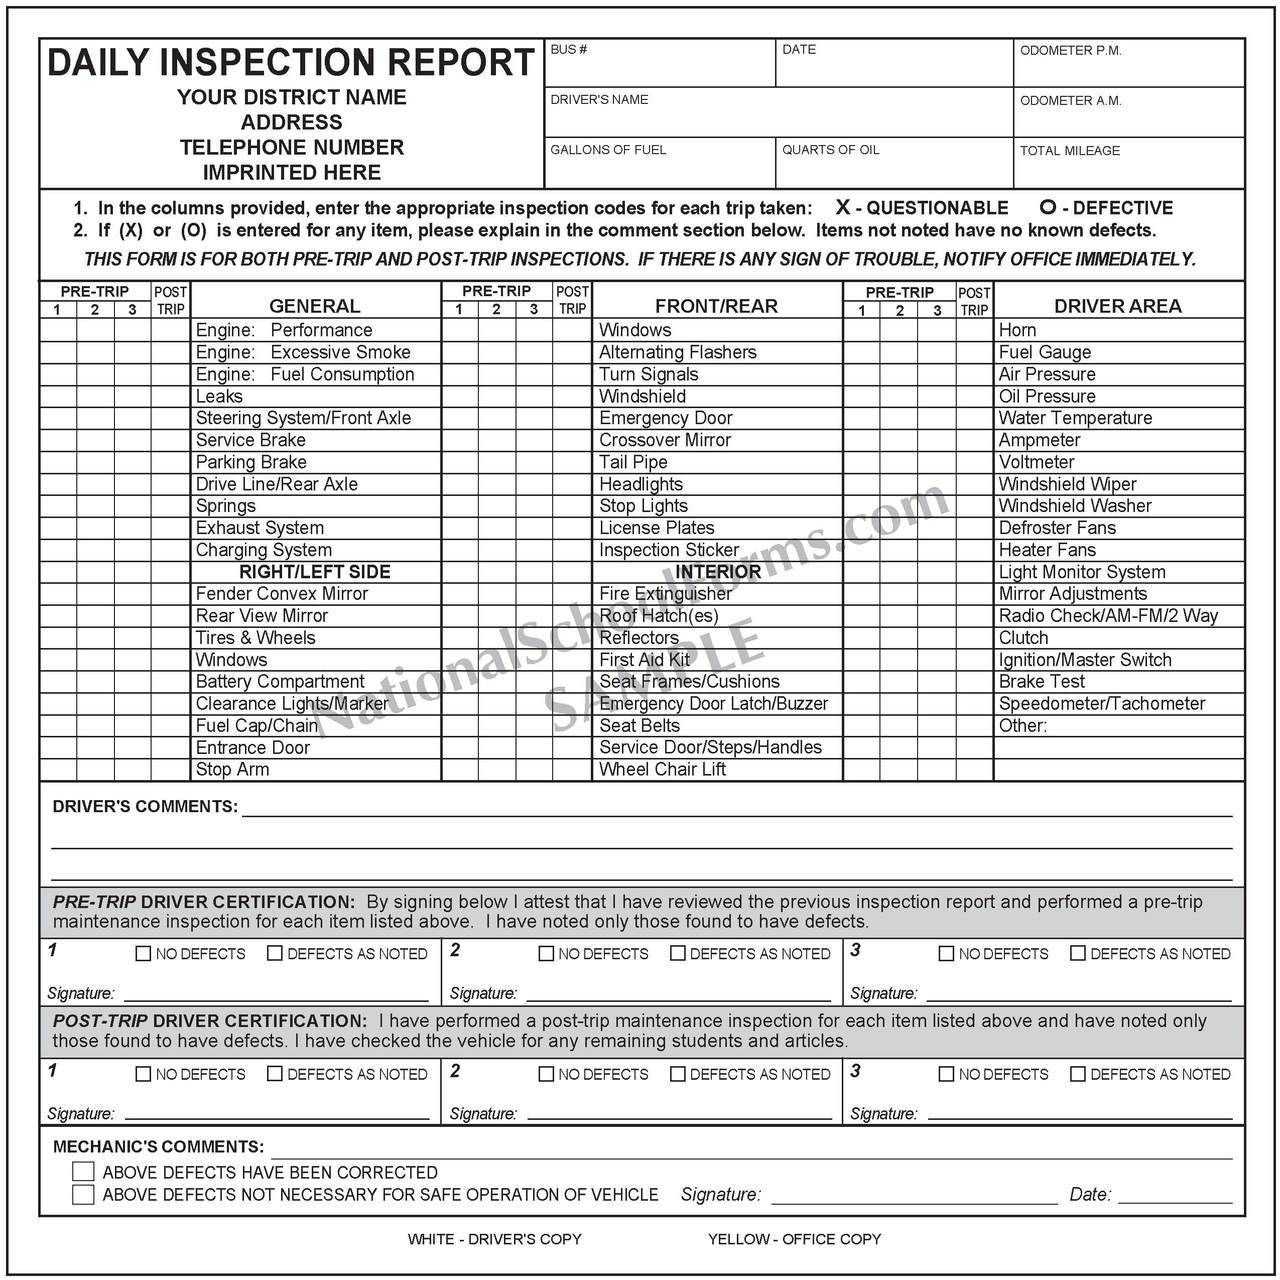 Daily Inspection Report With Pre And Post Trip | Vehicle Throughout Daily Inspection Report Template